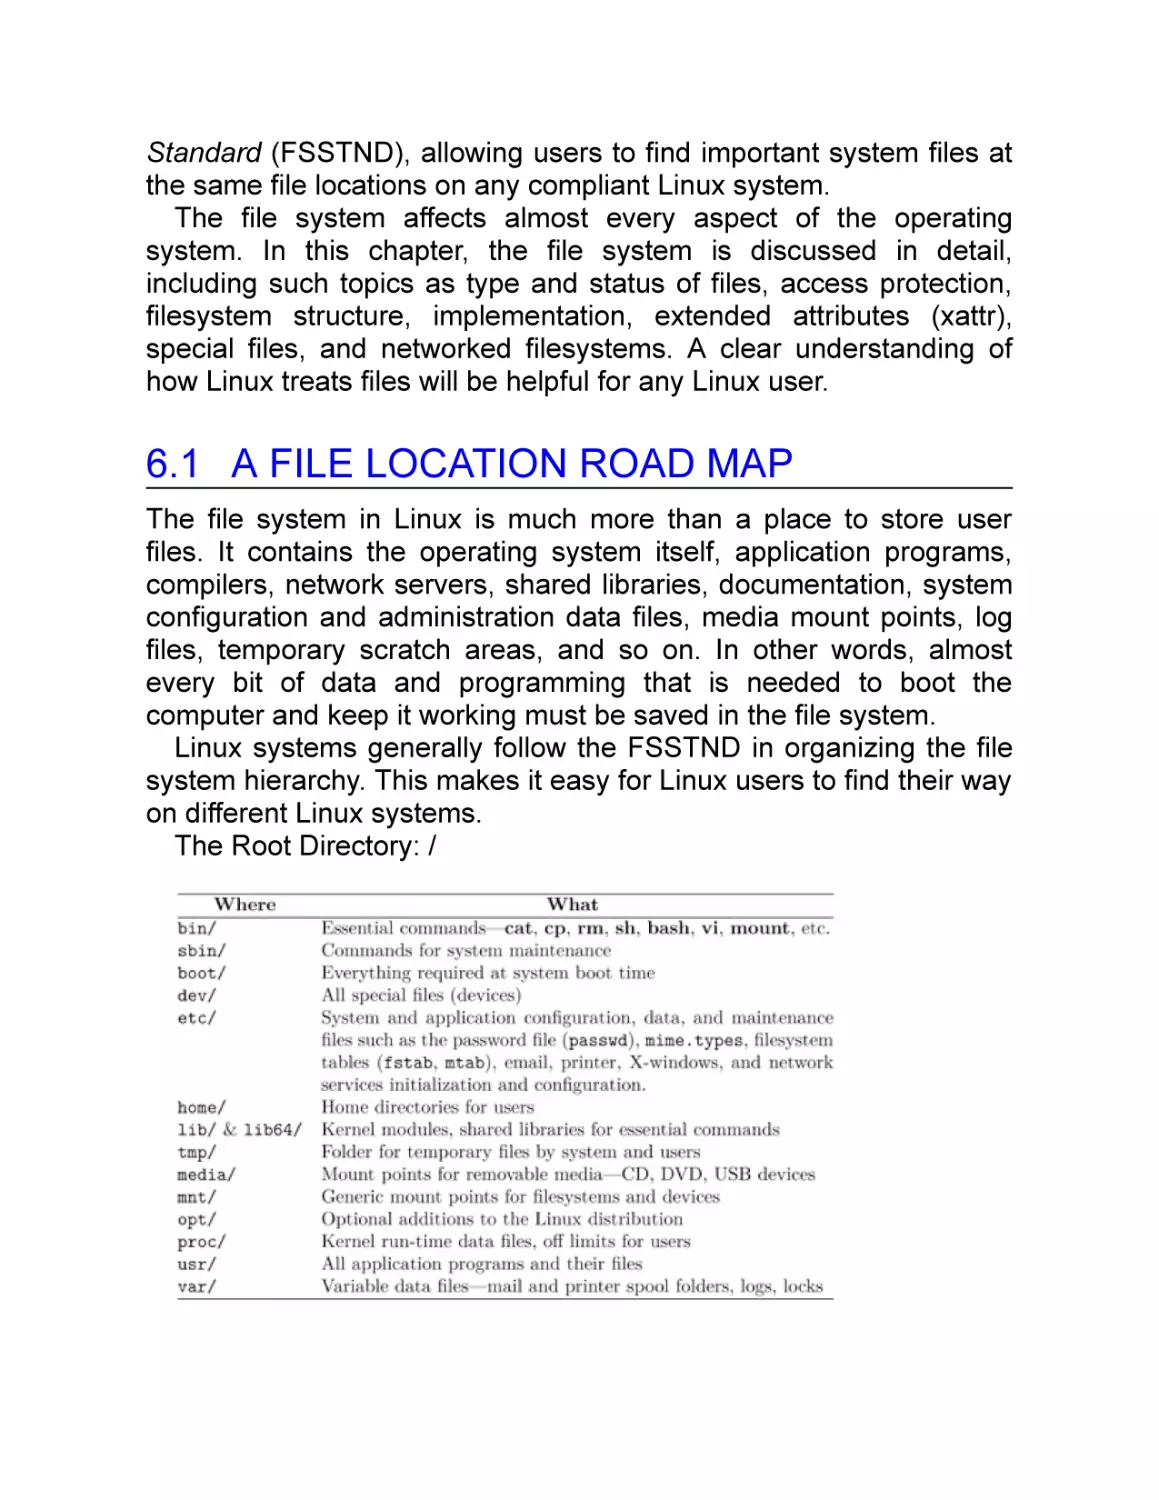 6.1 A File Location Road Map